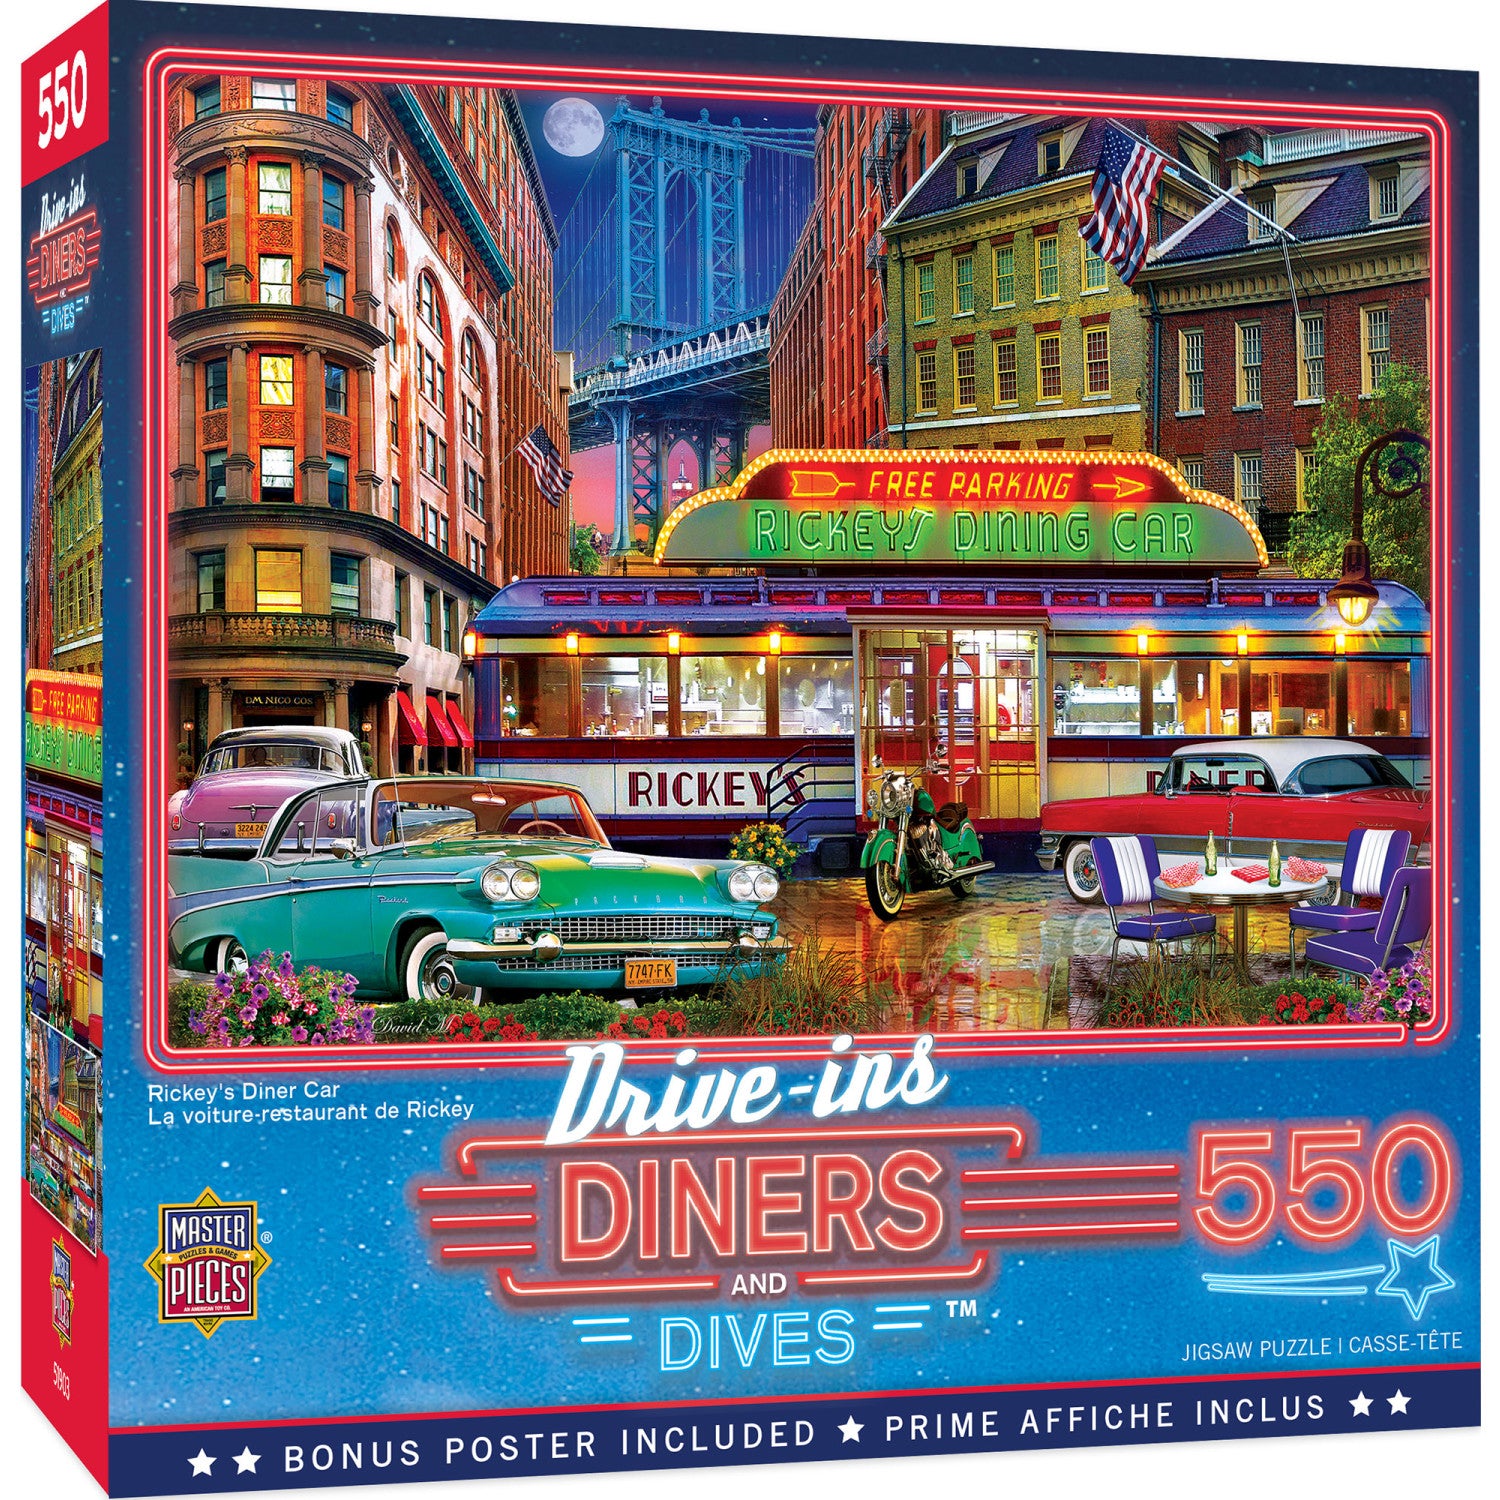 Drive-Ins, Diners & Dives - Rickey's Diner Car 550 Piece Jigsaw Puzzle